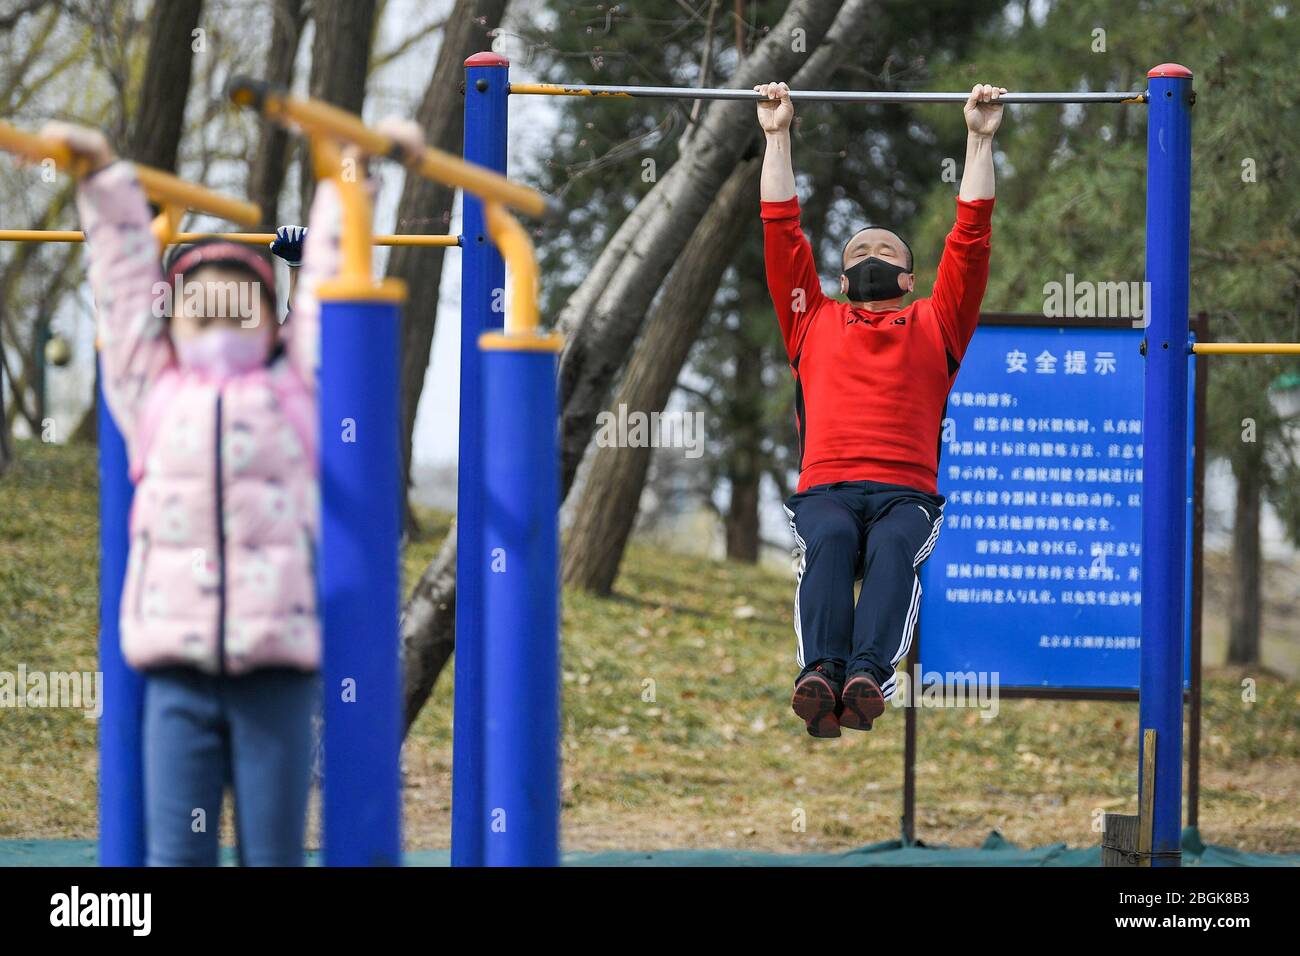 Citizens do exercise by jogging or with fitness equipment at a